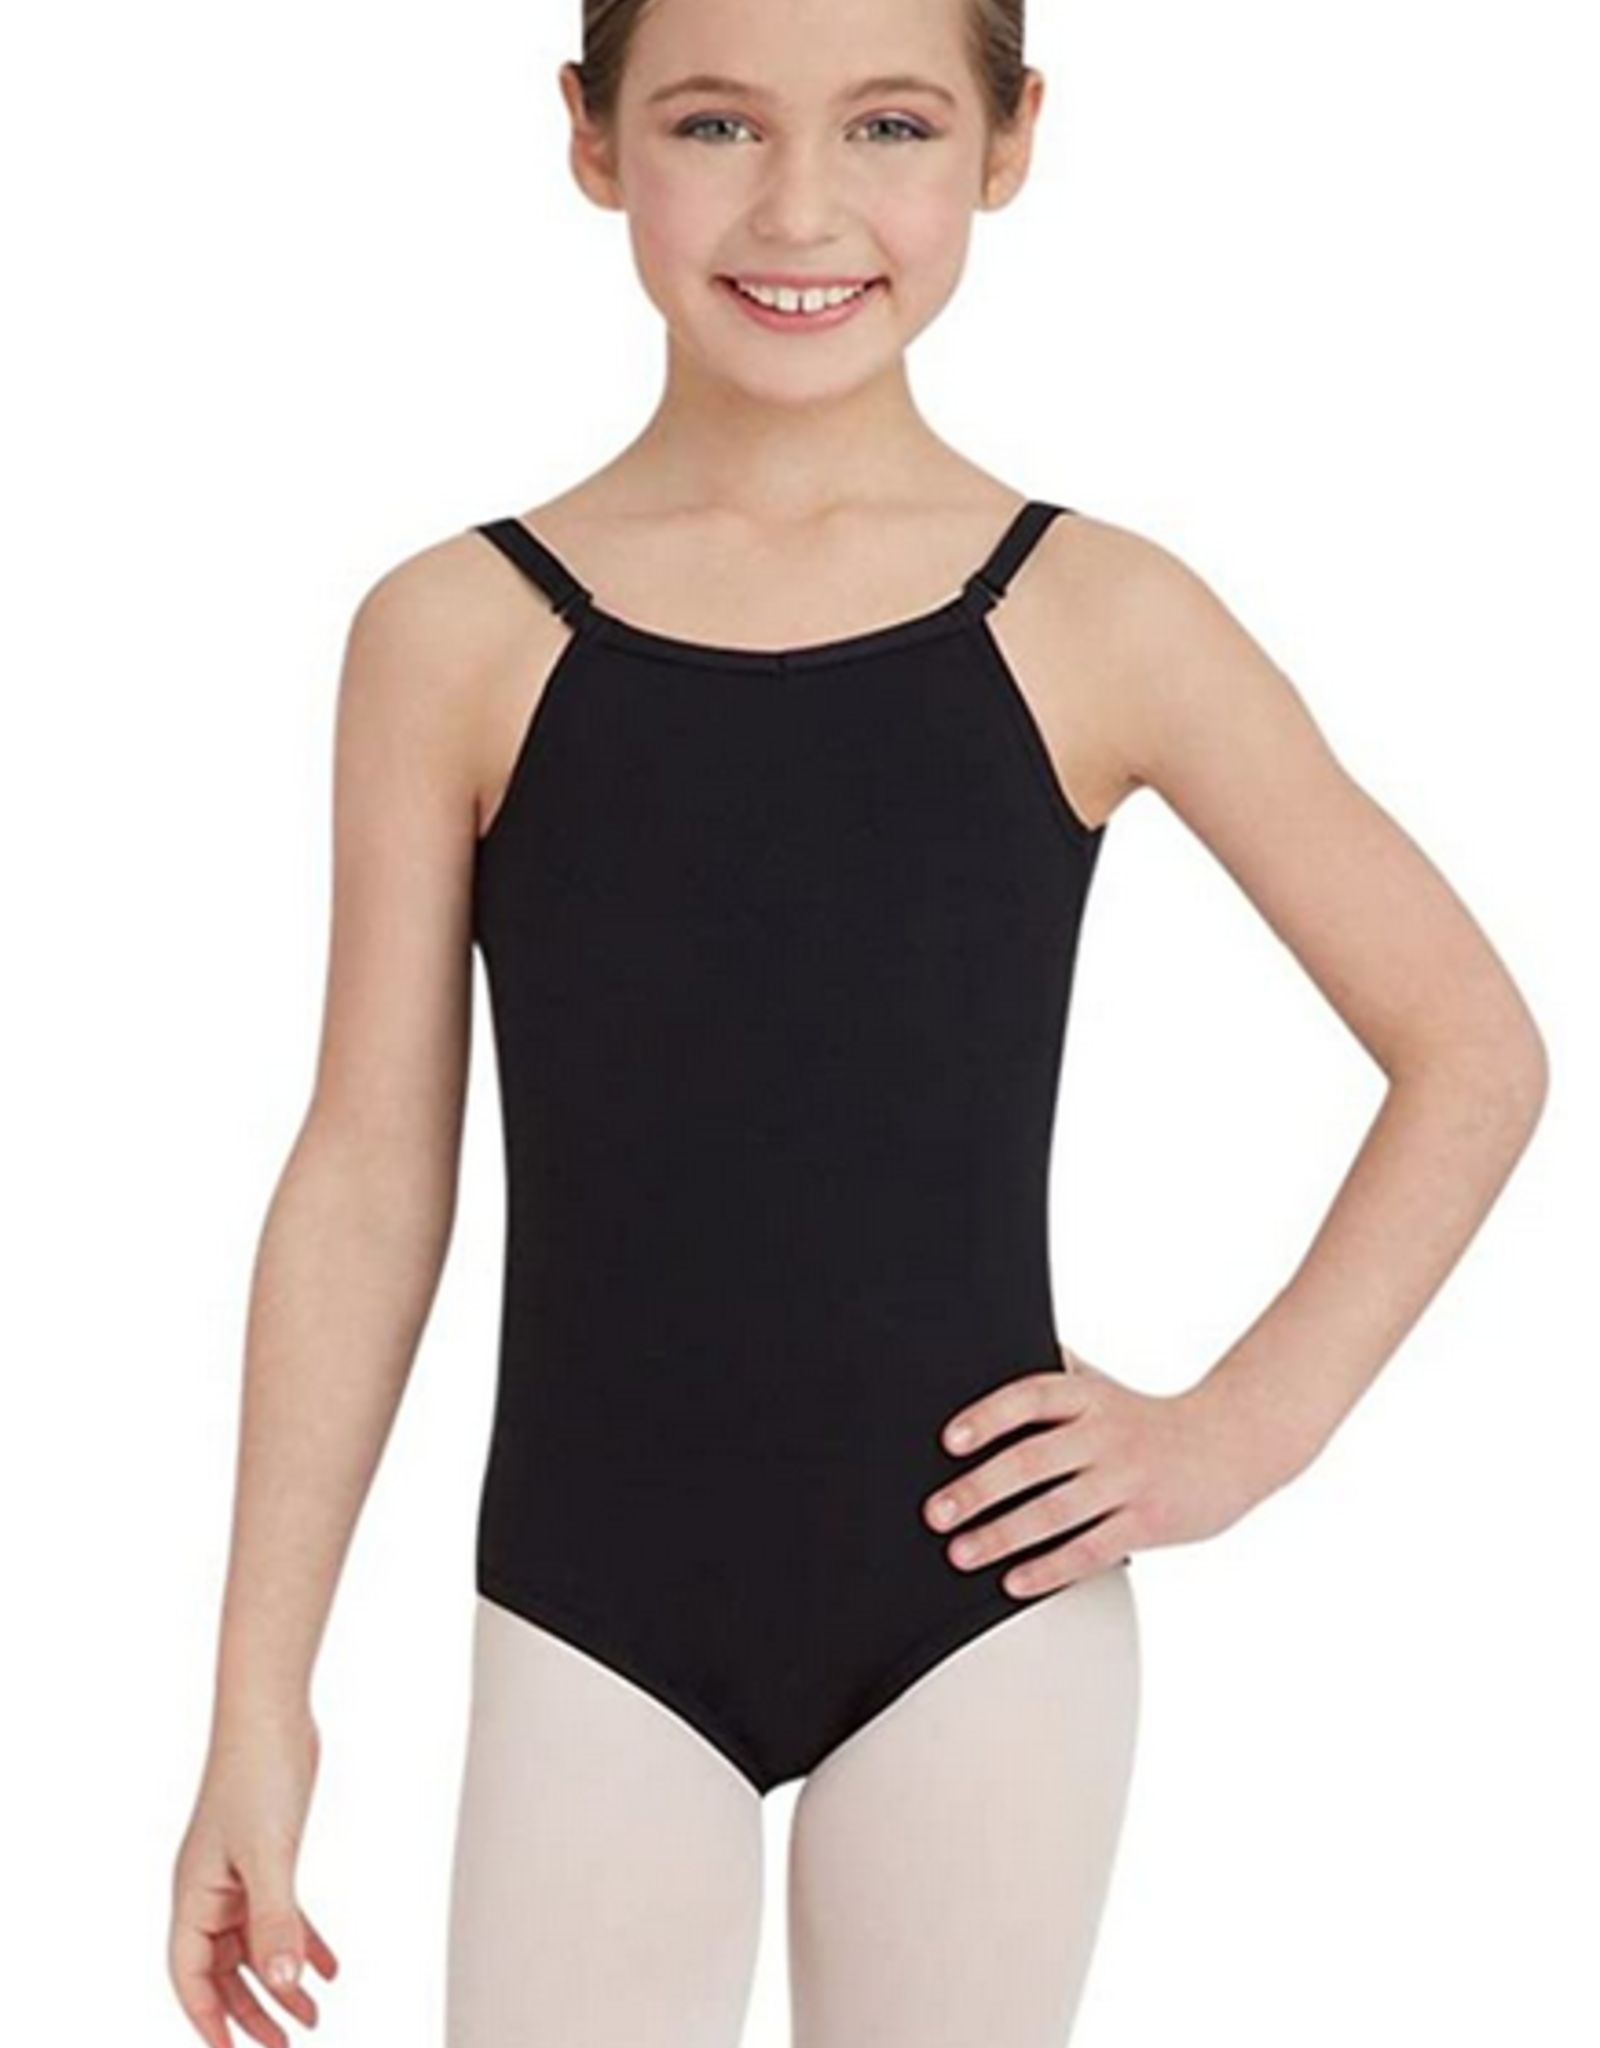 MOTIONWEAR CLASSIC CAMISOLE LEOTARD WITH ADJUSTABLE STRAPS  (2565C)